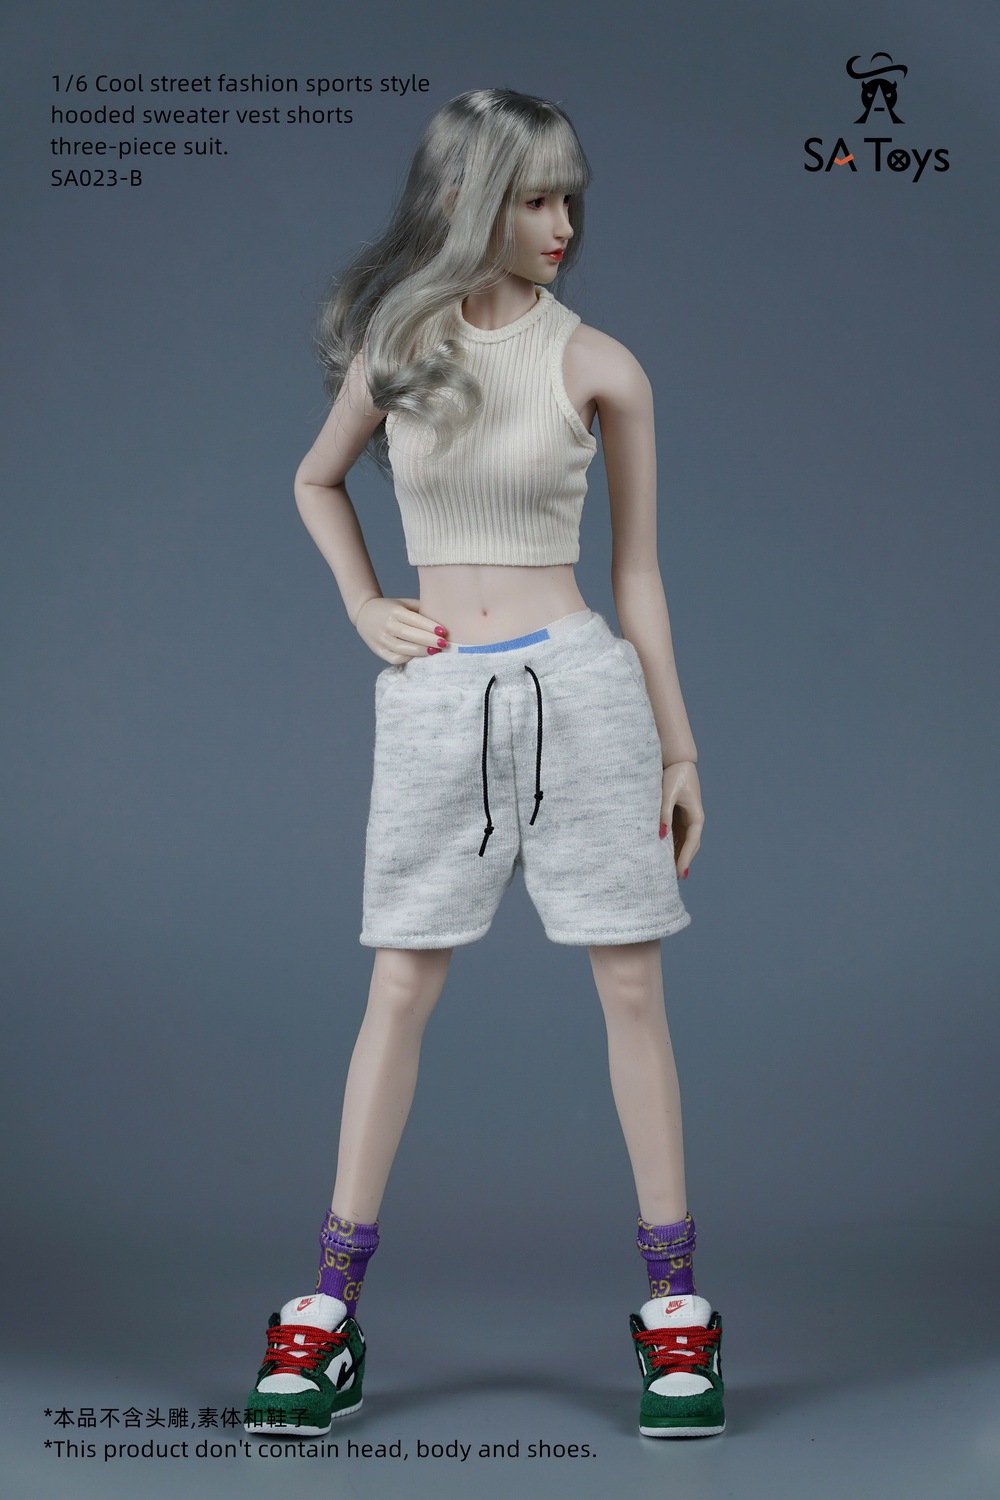 hiphop - NEW PRODUCT: SA Toys: 1/6 hip skirt / floral elastic skirt / fashionable sports style hooded sweater cover, hip-hop fisherman hat halter and footwear casual pants [variety optional] 17020111